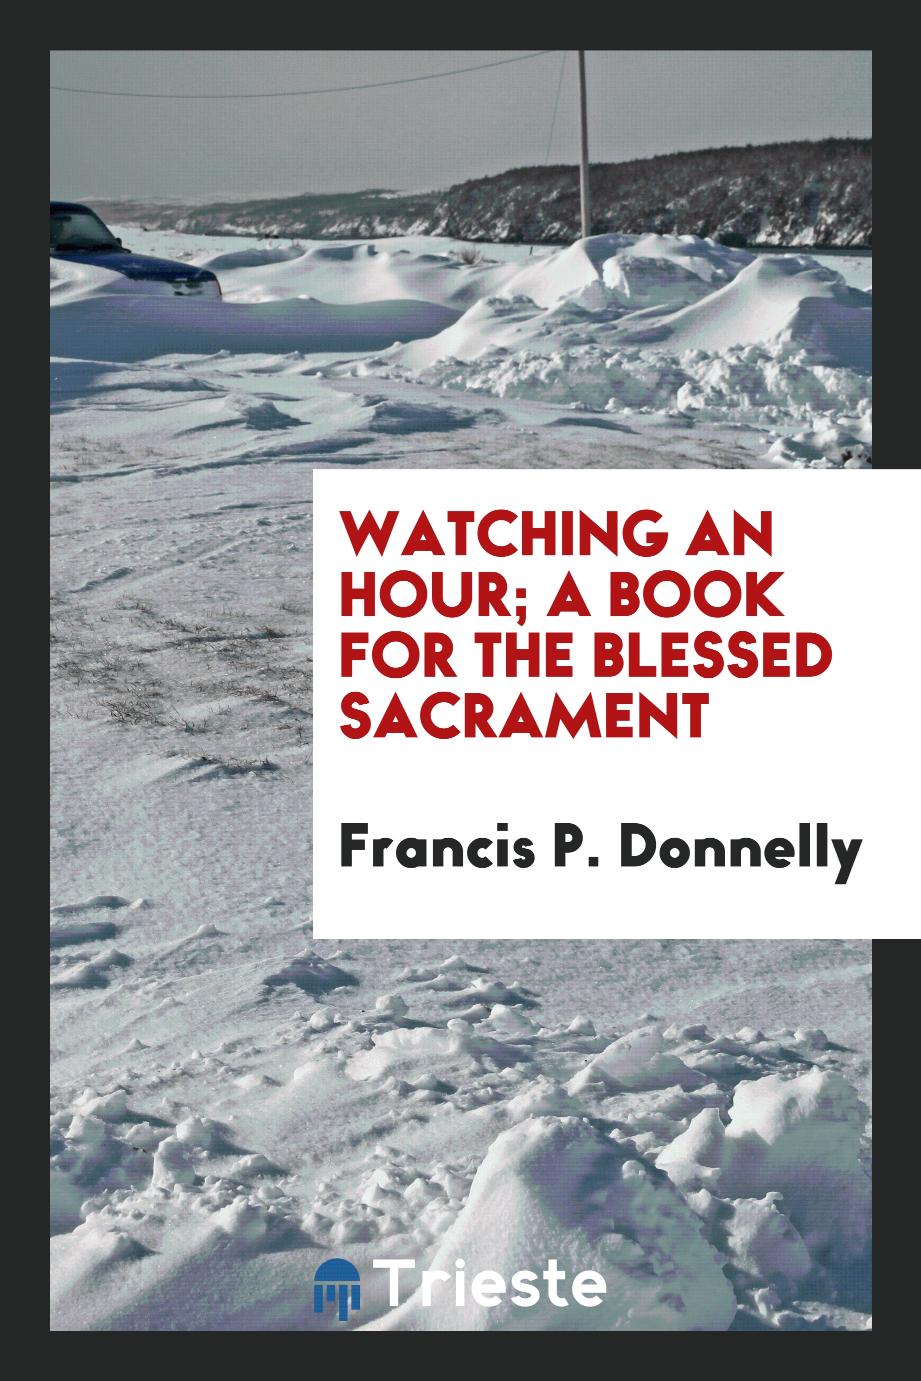 Watching an hour; a book for the Blessed Sacrament